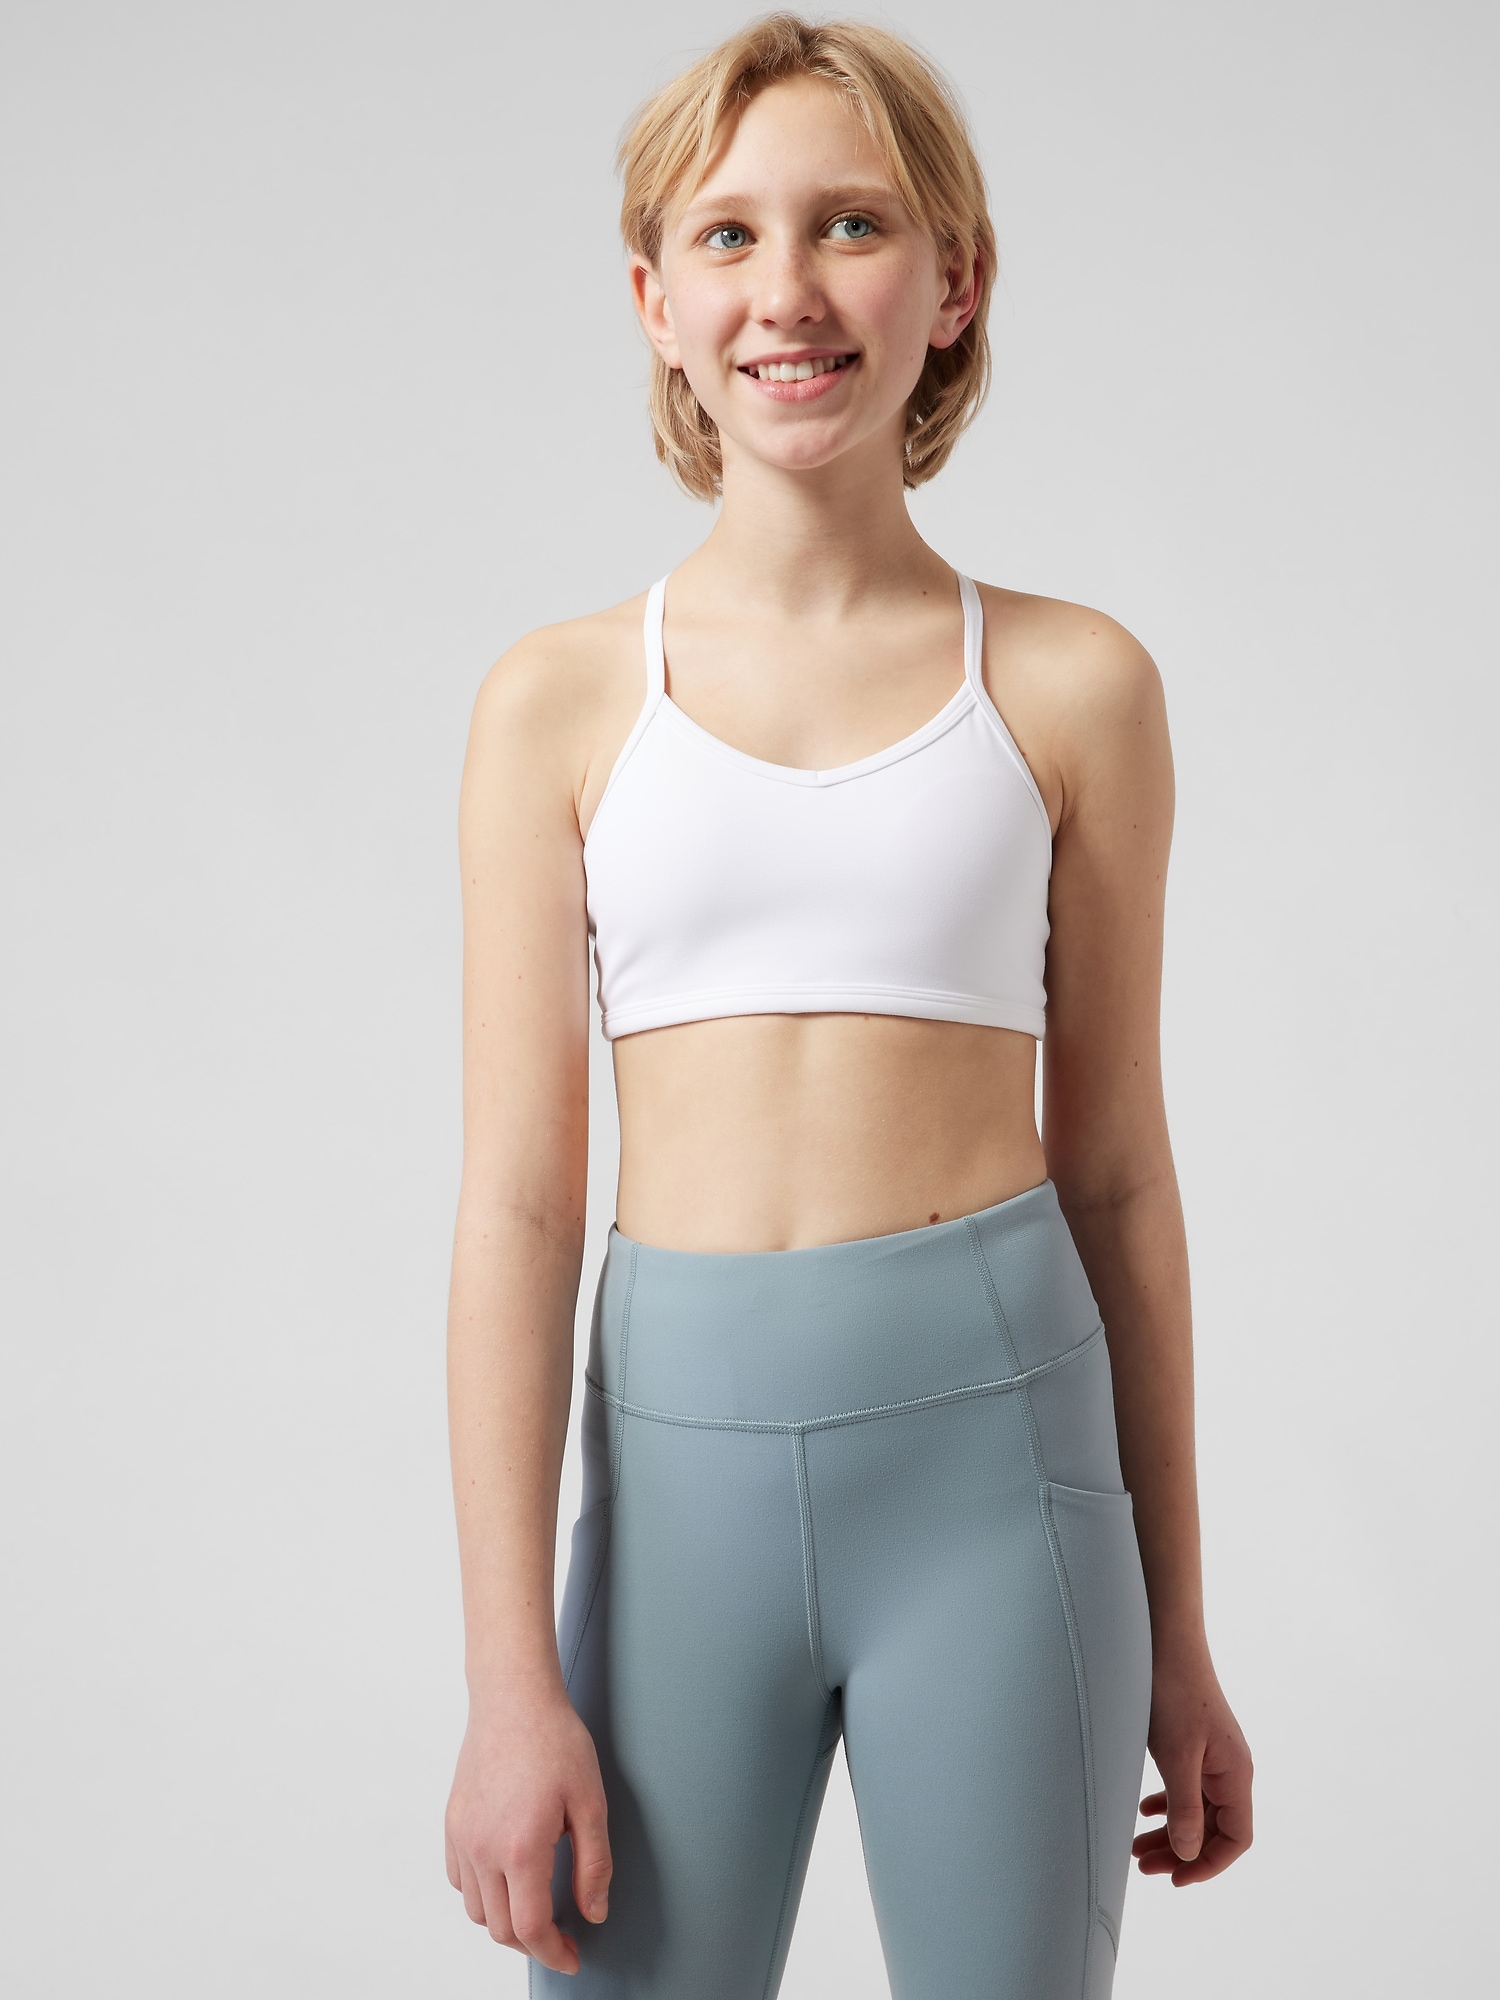 AA Online Shop - Lady Sando Bra for Teens & Adult Size